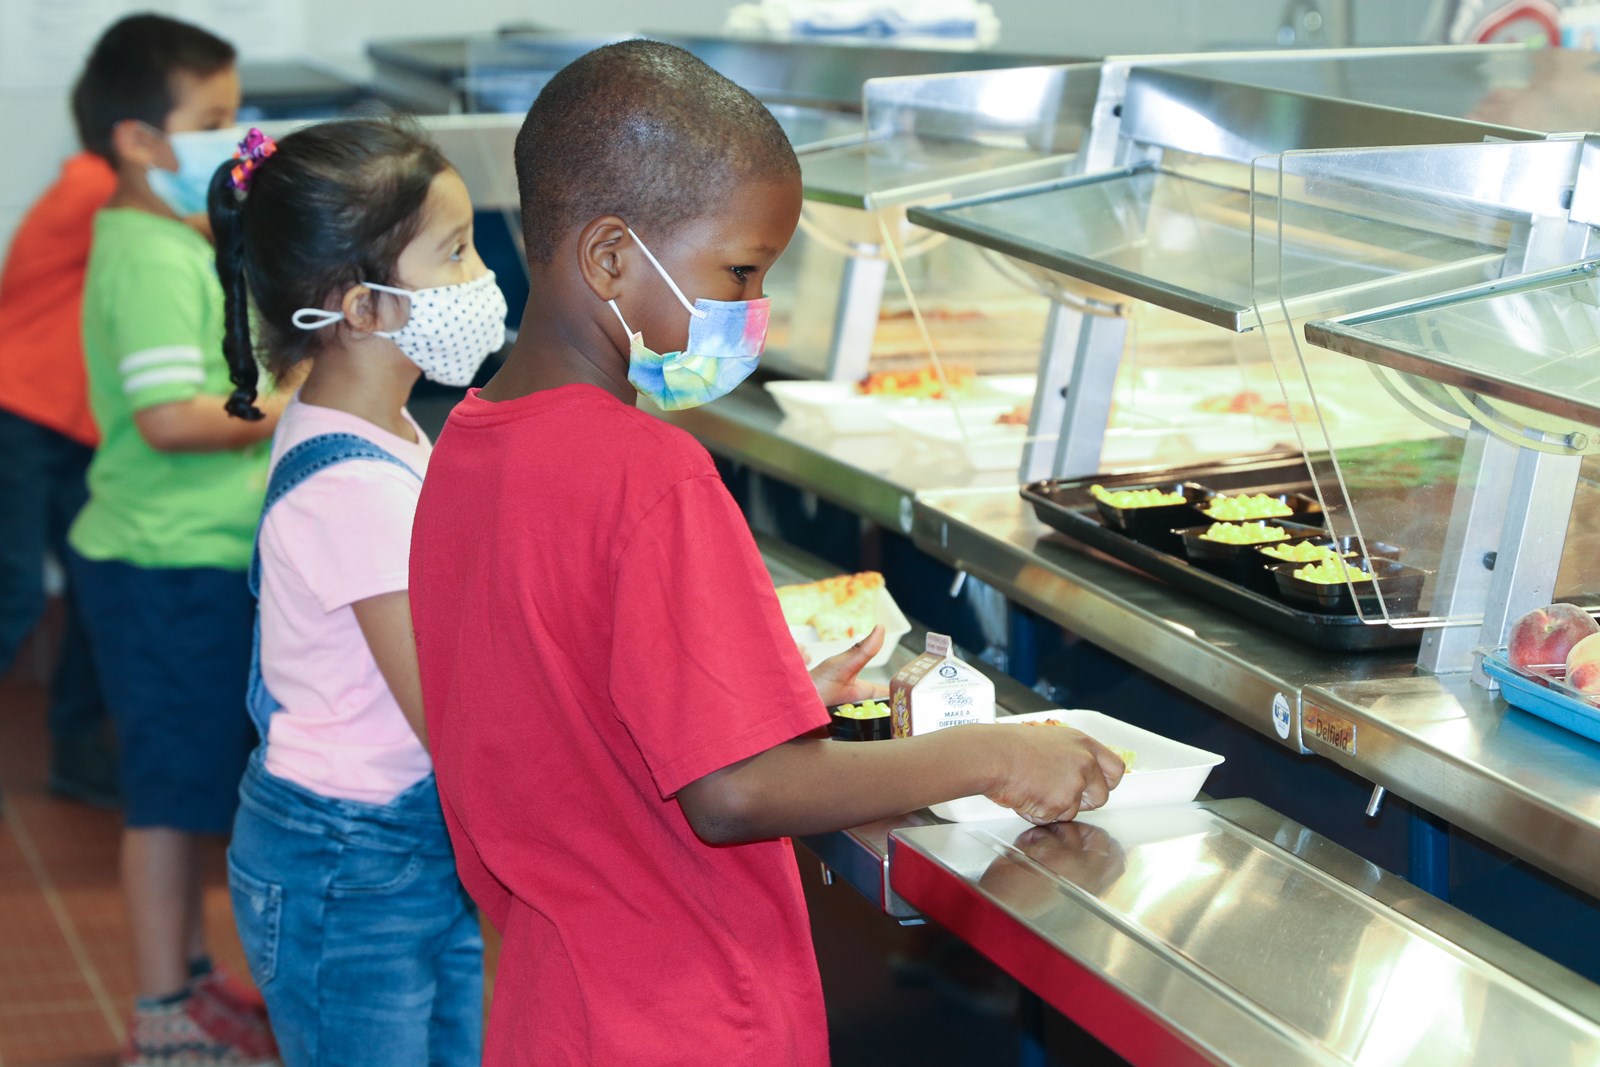 Students pick up lunch during summer learning program at Clarkdale Elementary School-16.jpg